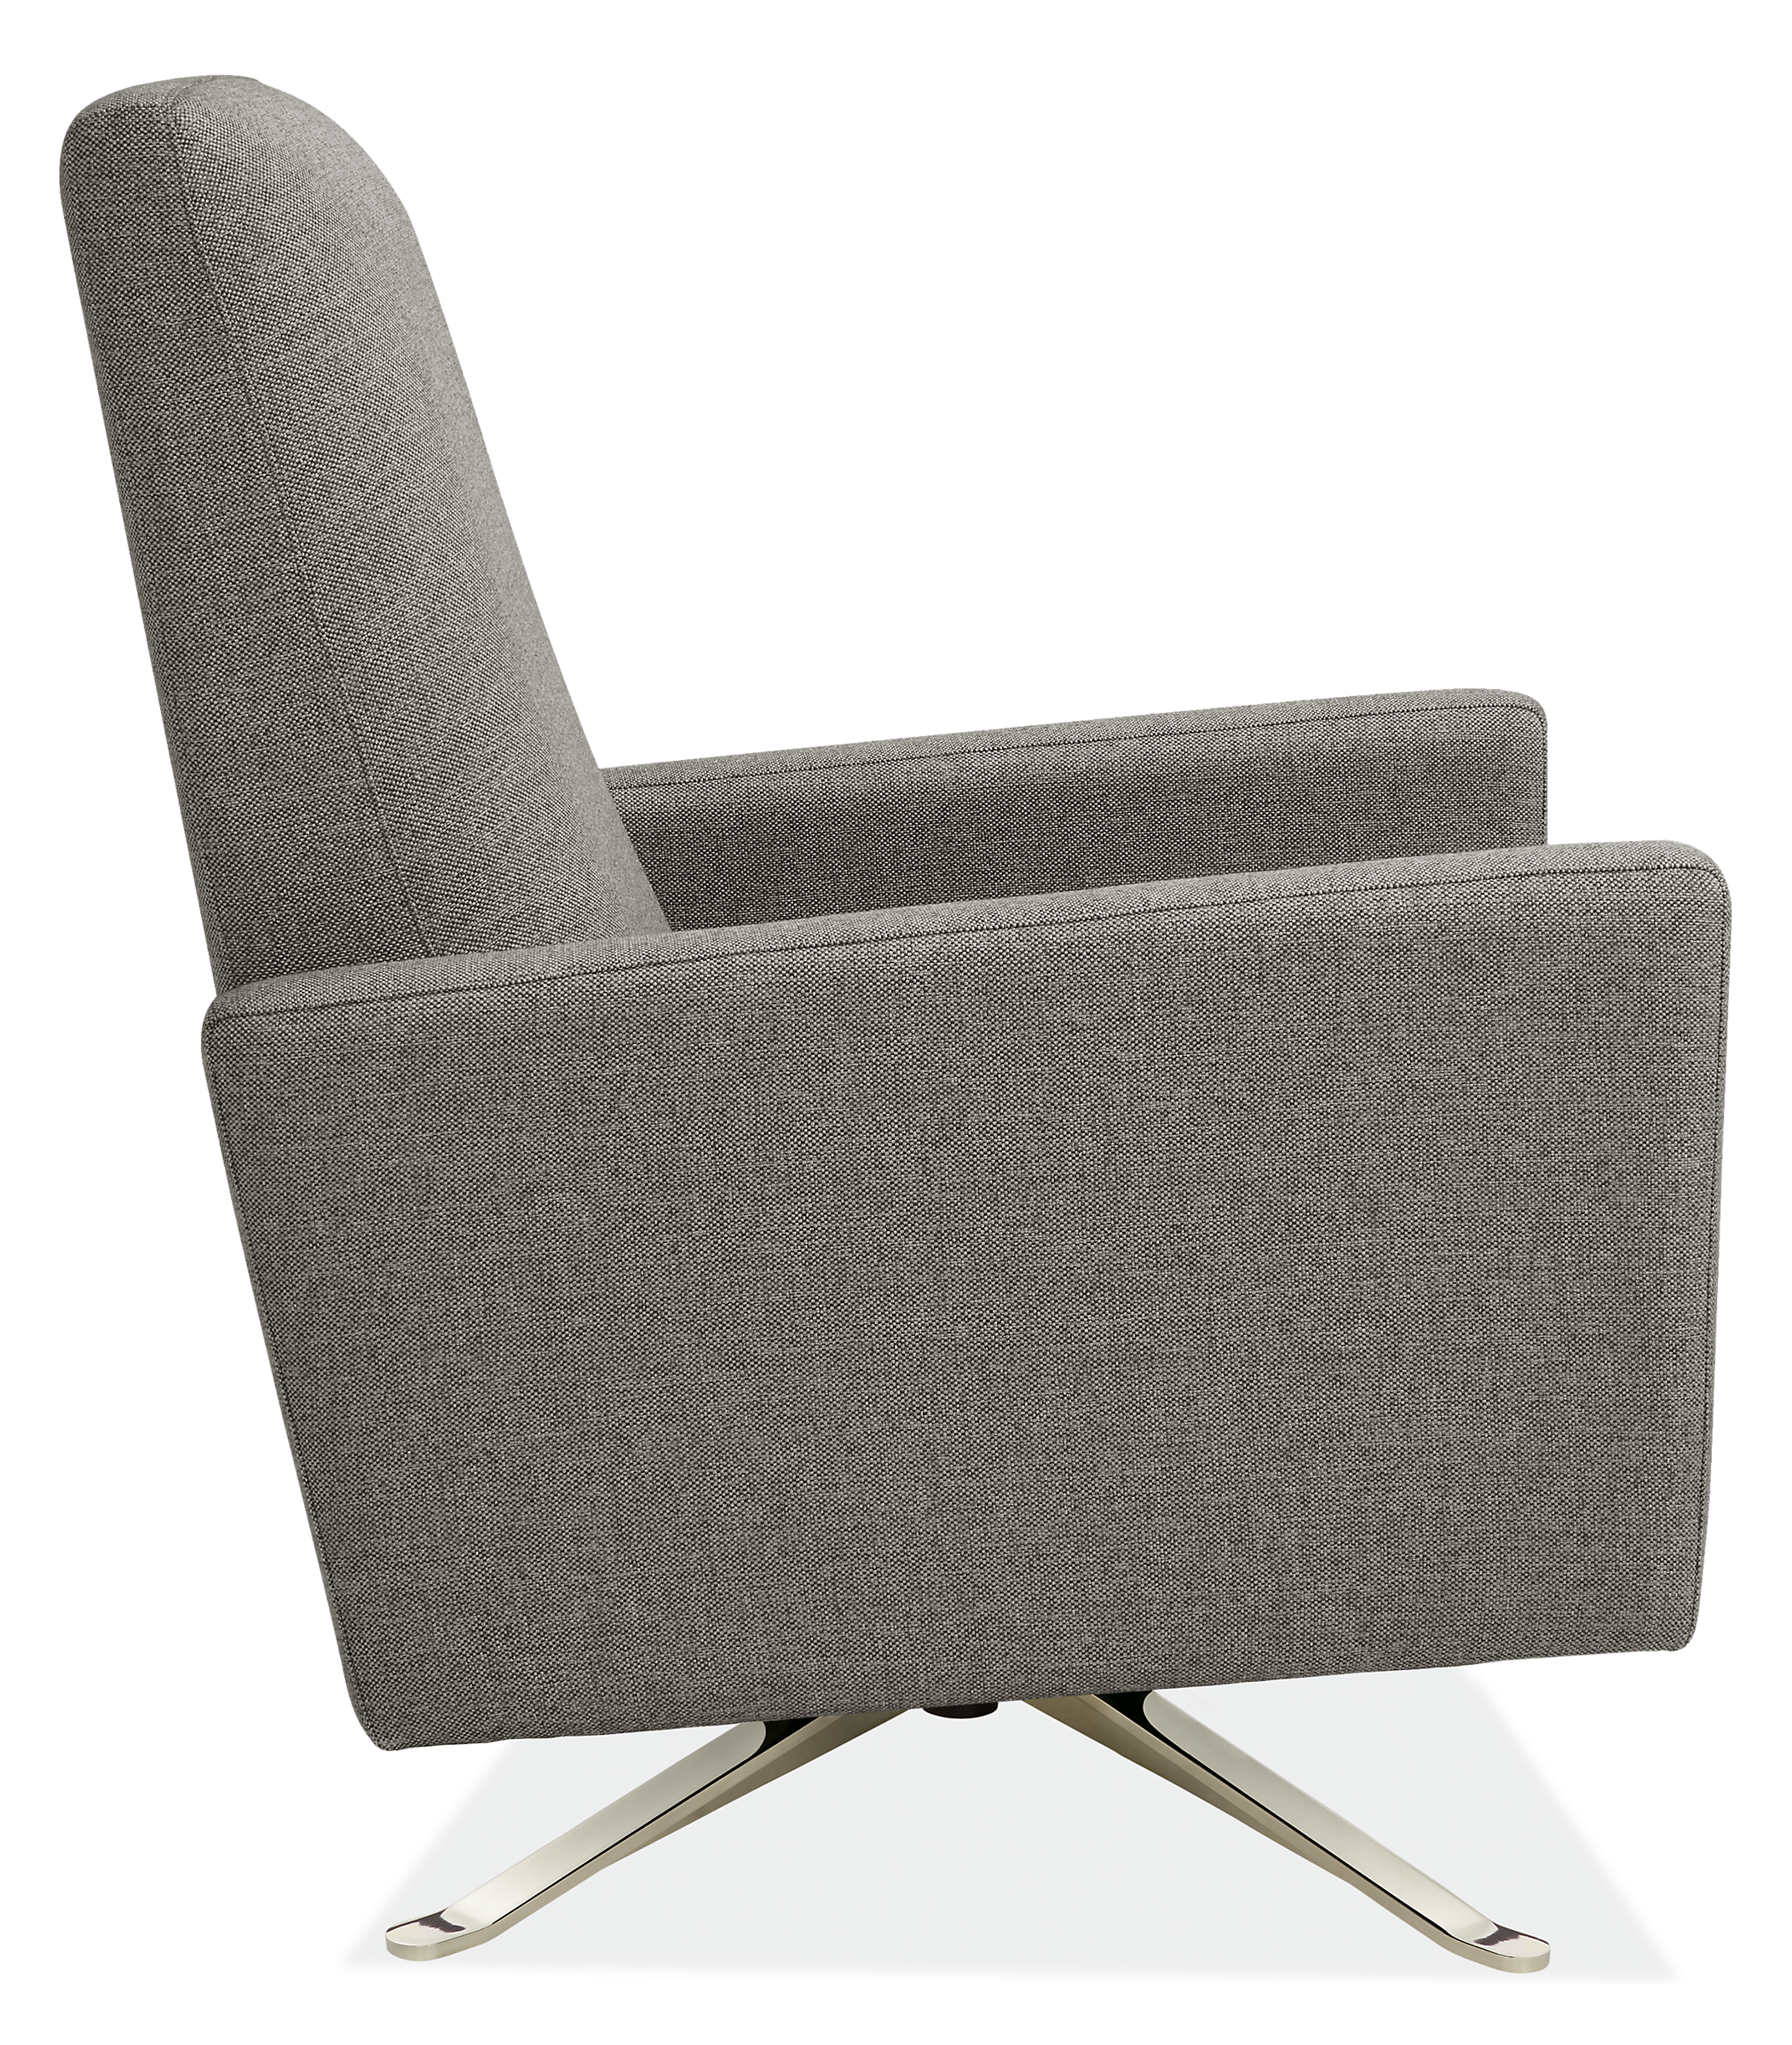 Side view of Arlo Thin-Arm Recliner in Tatum Fabric with Metal Base.